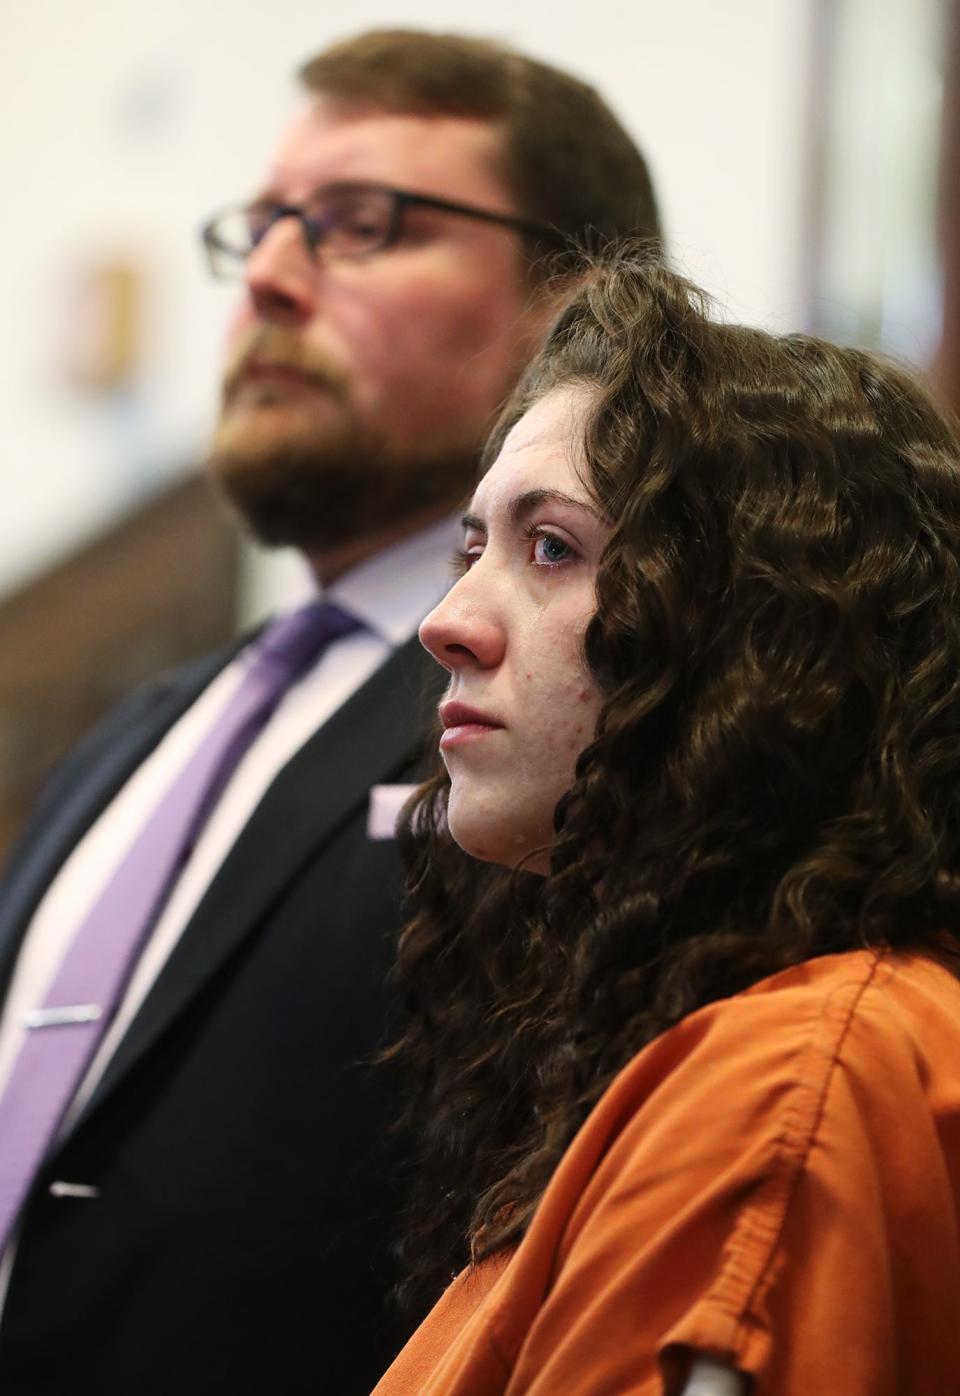 Jillian Ibel and her attorney Wes Buchanan listen to Tina Ibel, Jillian's mother address the court, speak via zoom during the sentencing of Jillian Ibel and Greg Chambers. Ibel and Chambers pleaded guilty to involuntary manslaughter in the death of their 7-week-old daughter Layla.